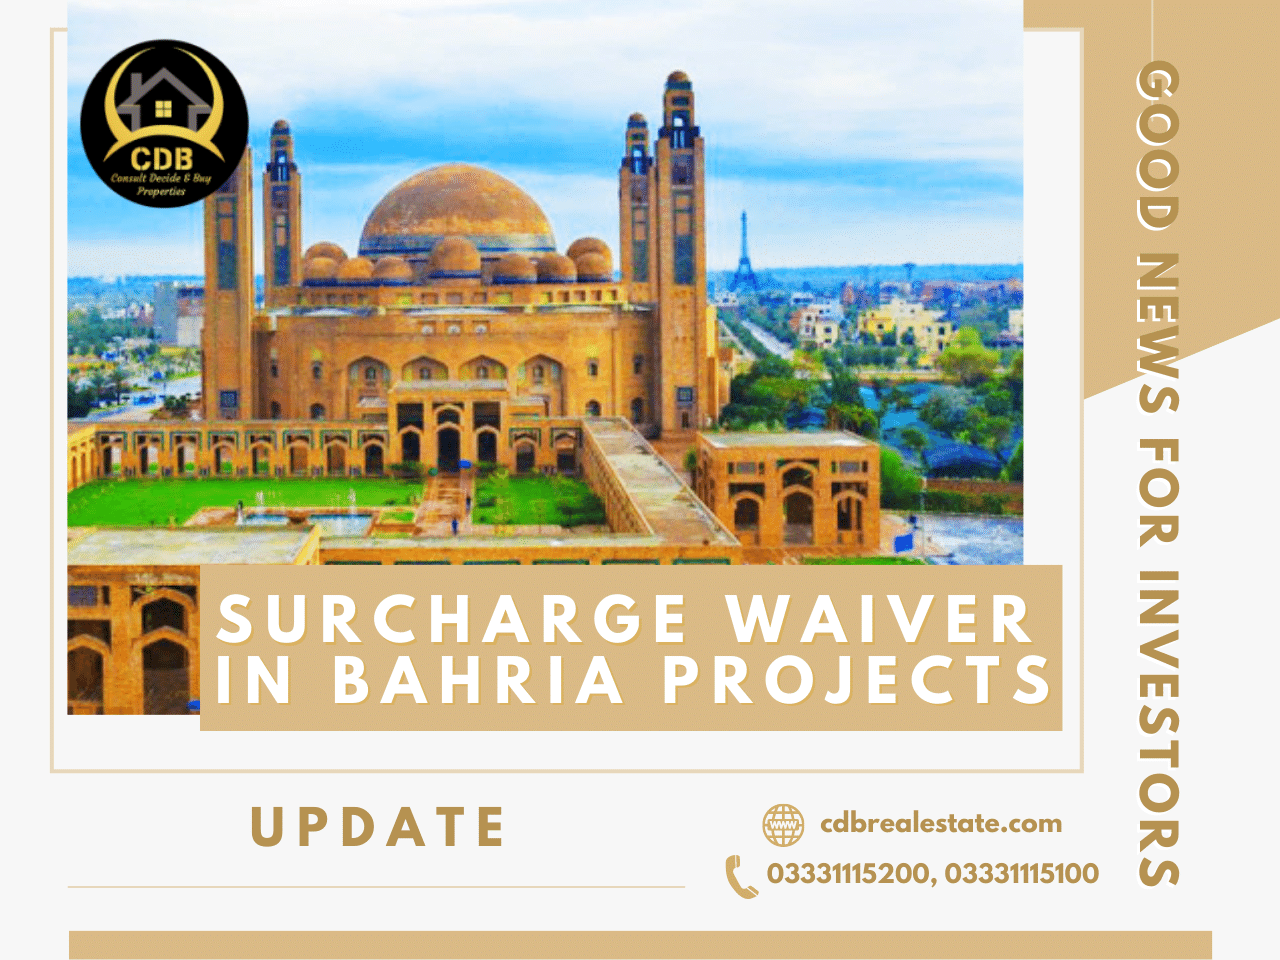 Surcharge Waiver in Bahria Projects